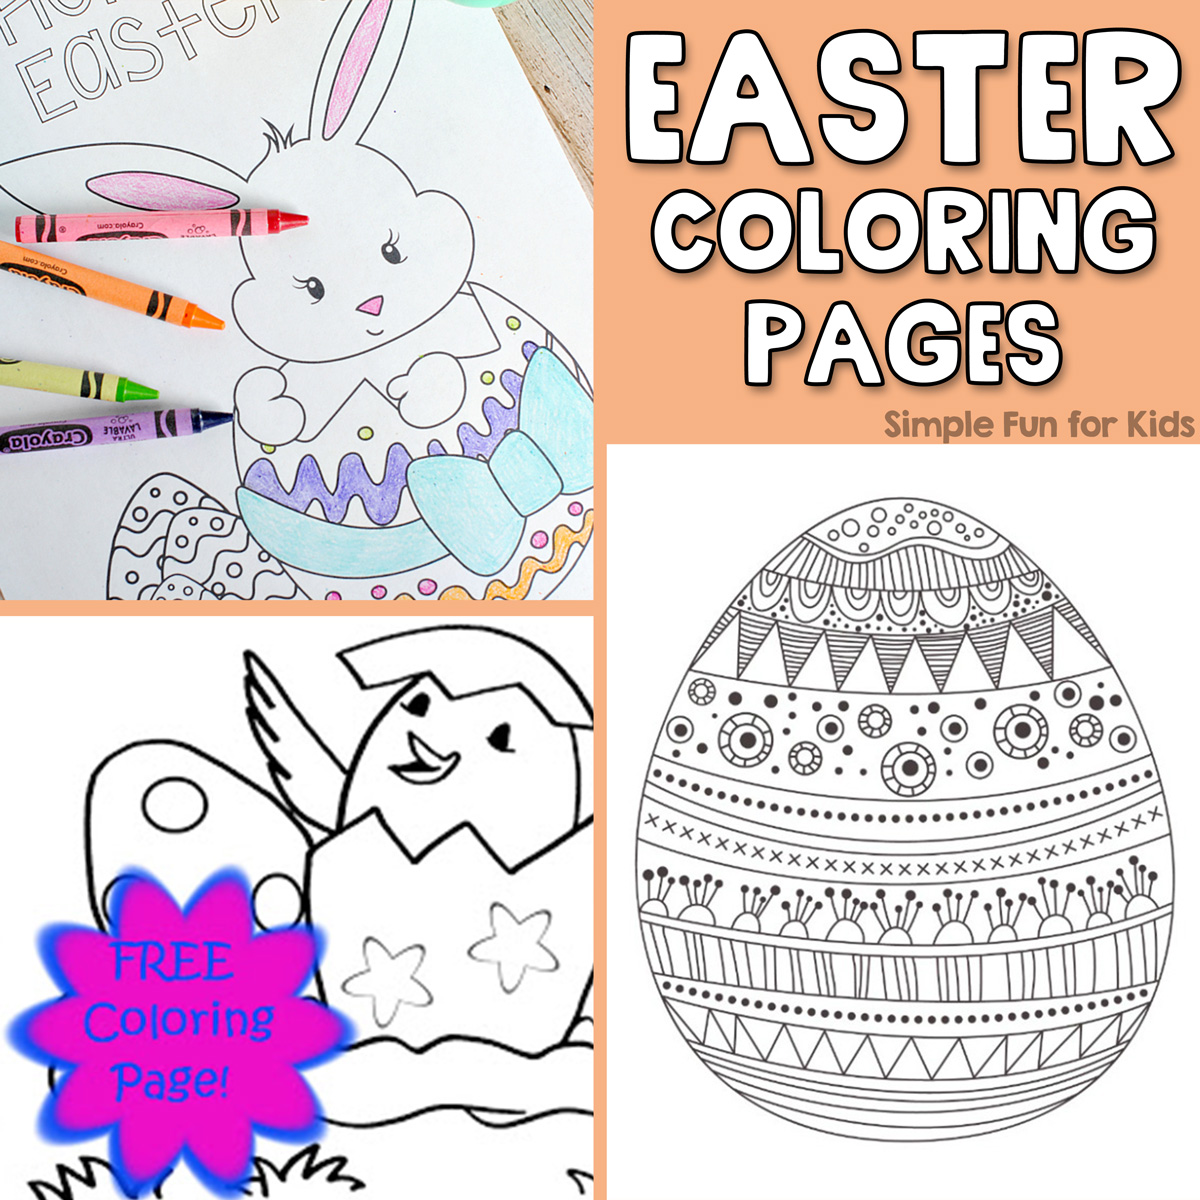 Printable Easter Coloring Pages: Bunny in an Easter egg, chick in an eggshell, detailed Easter egg pattern for adults.